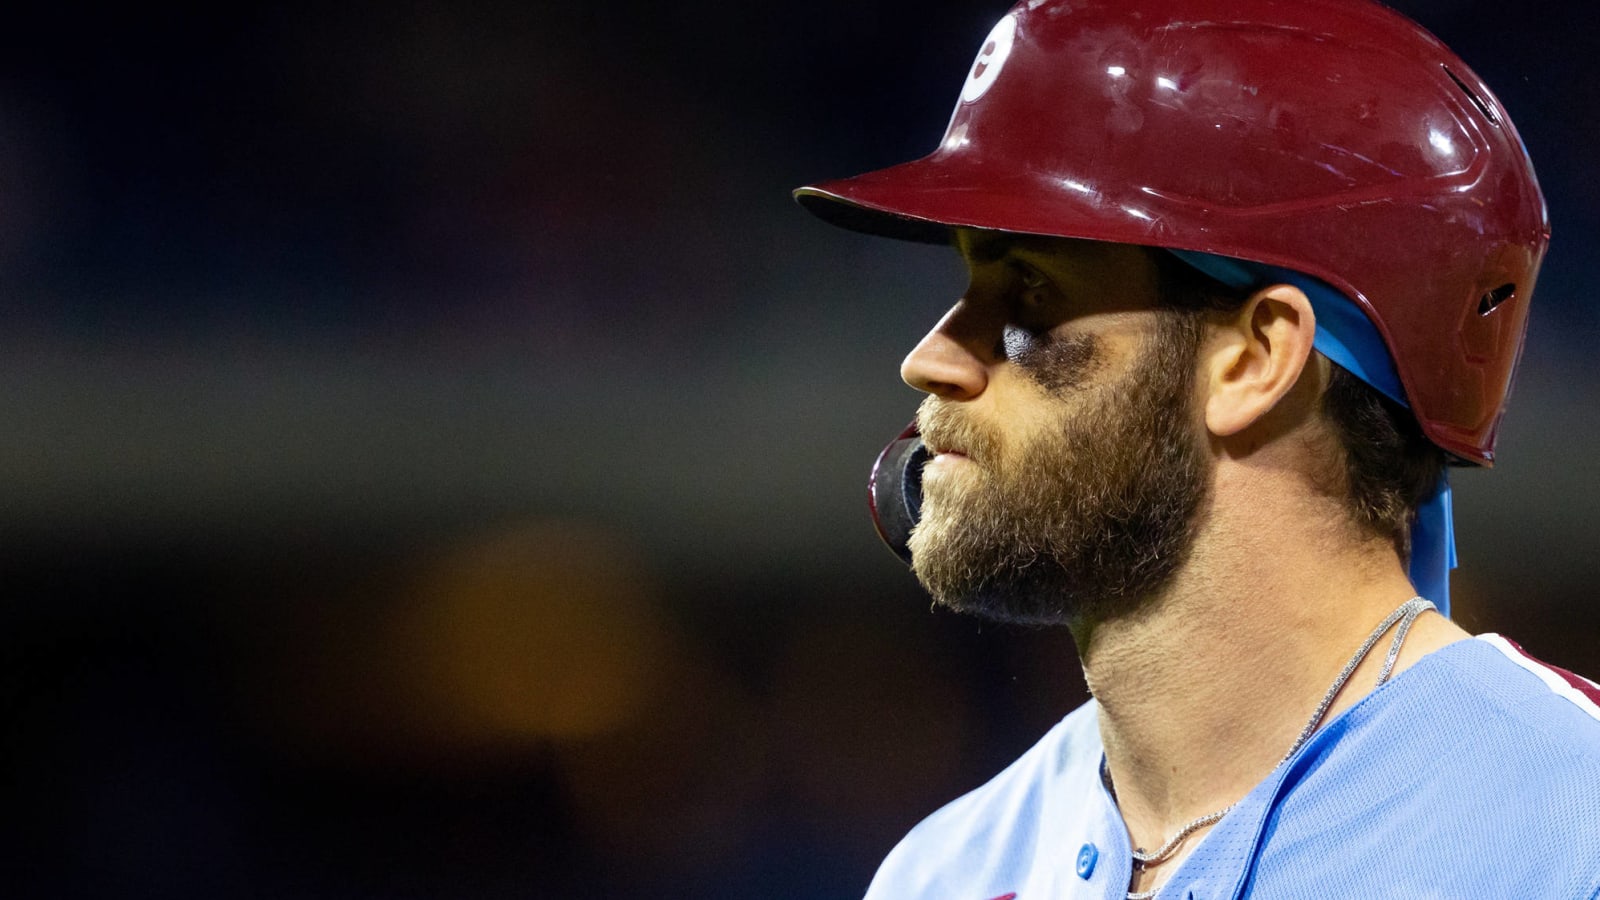 Bryce Harper removed from game due to injury